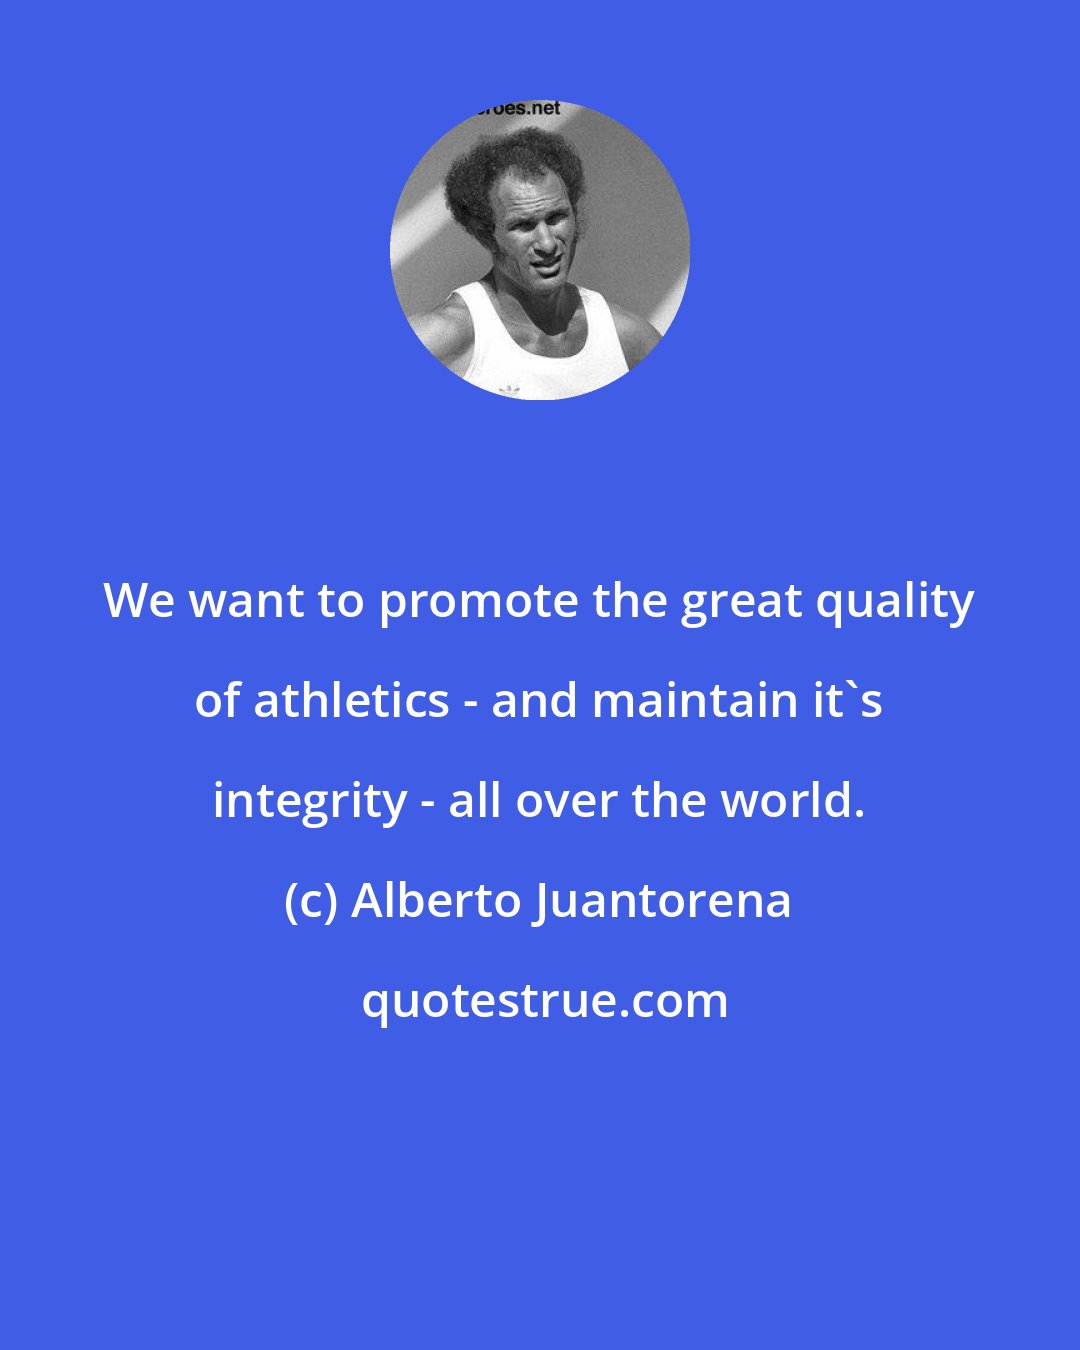 Alberto Juantorena: We want to promote the great quality of athletics - and maintain it's integrity - all over the world.